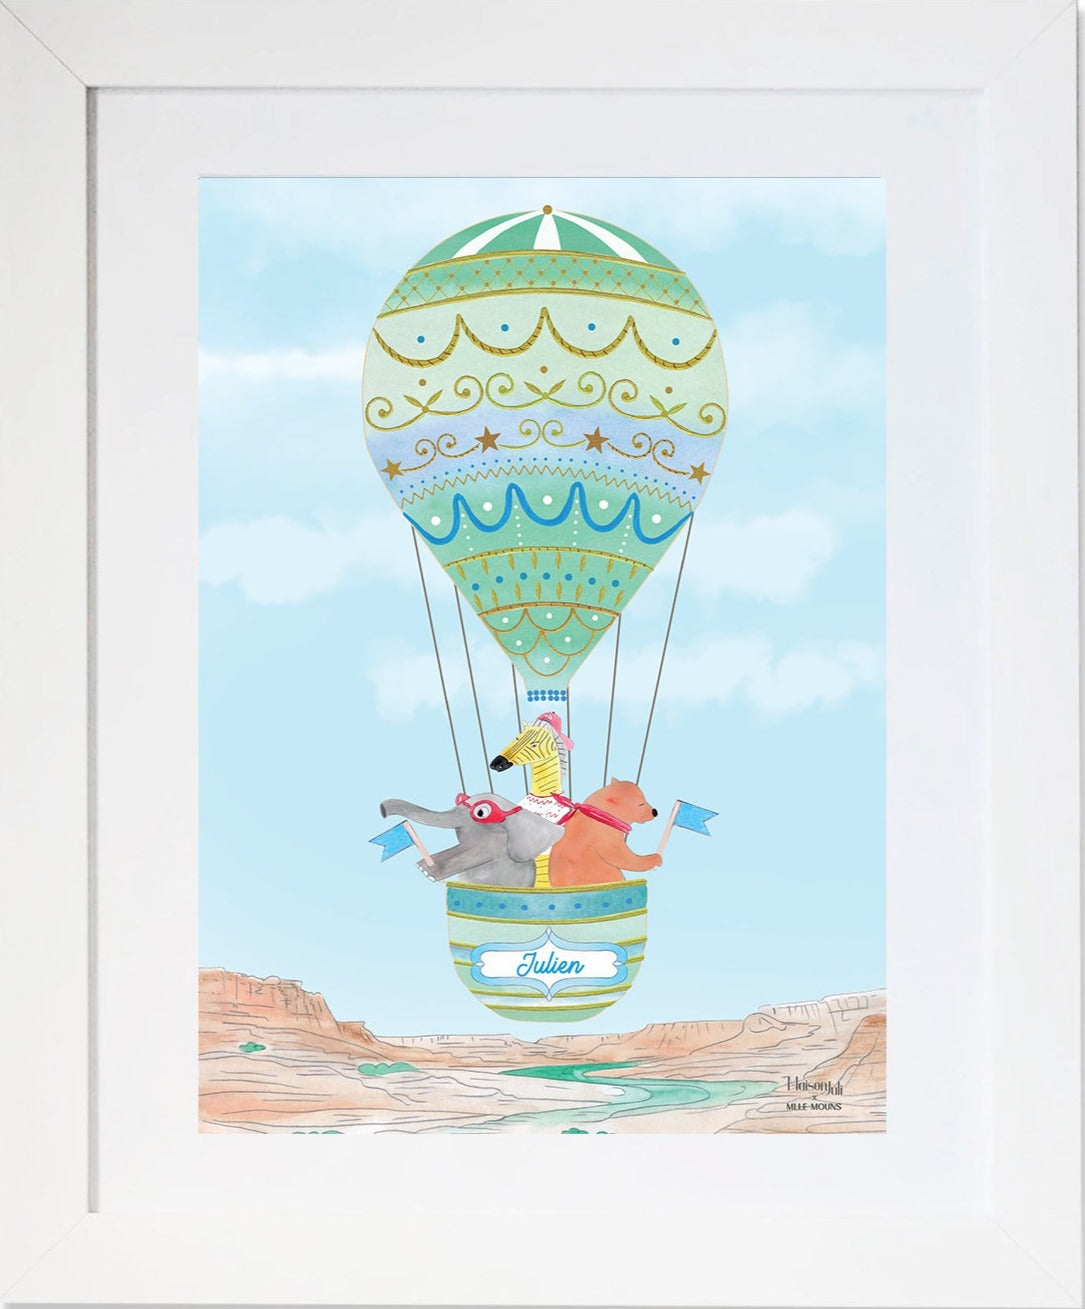 The Personalised Hot Air Balloon of the Grand Canyon Artwork for boys